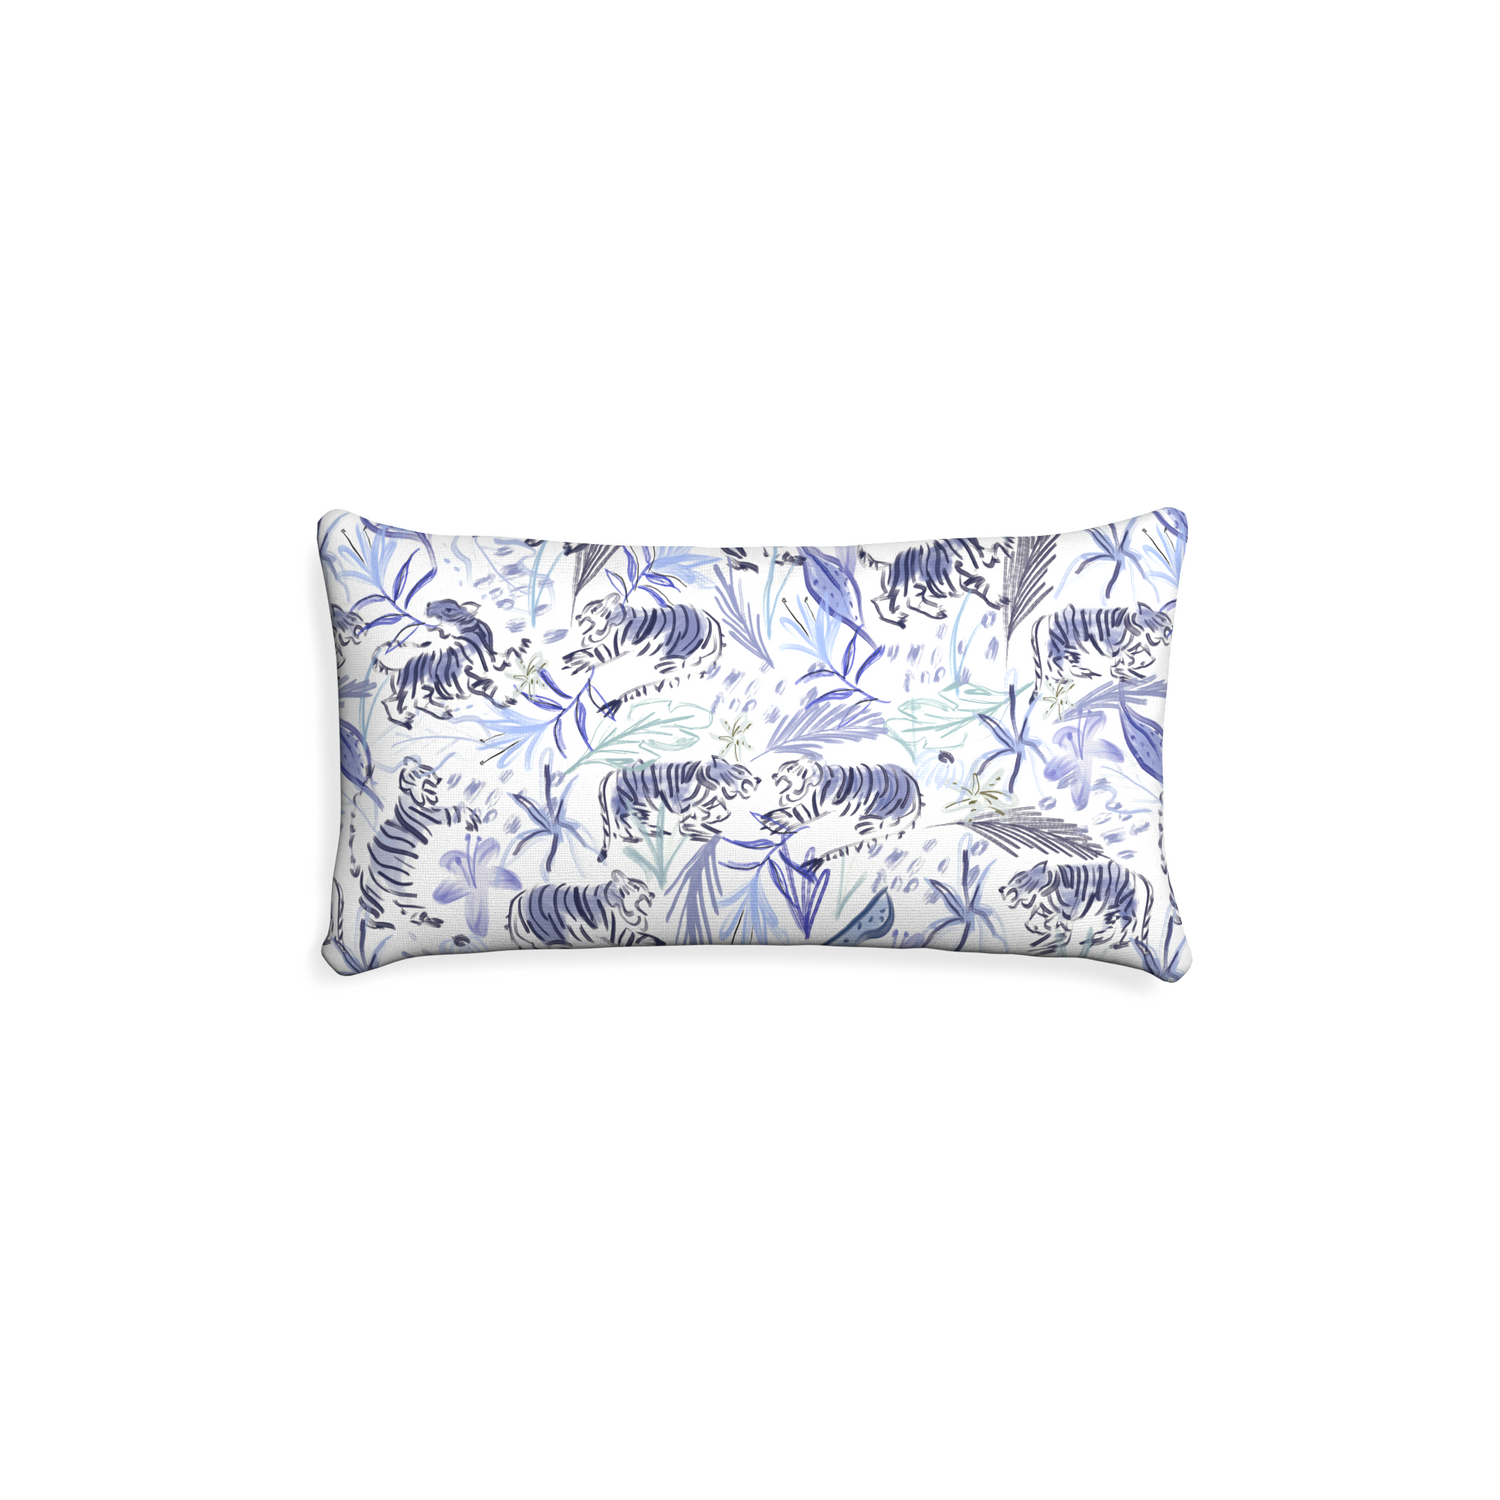 Petite-lumbar frida blue custom blue with intricate tiger designpillow with none on white background